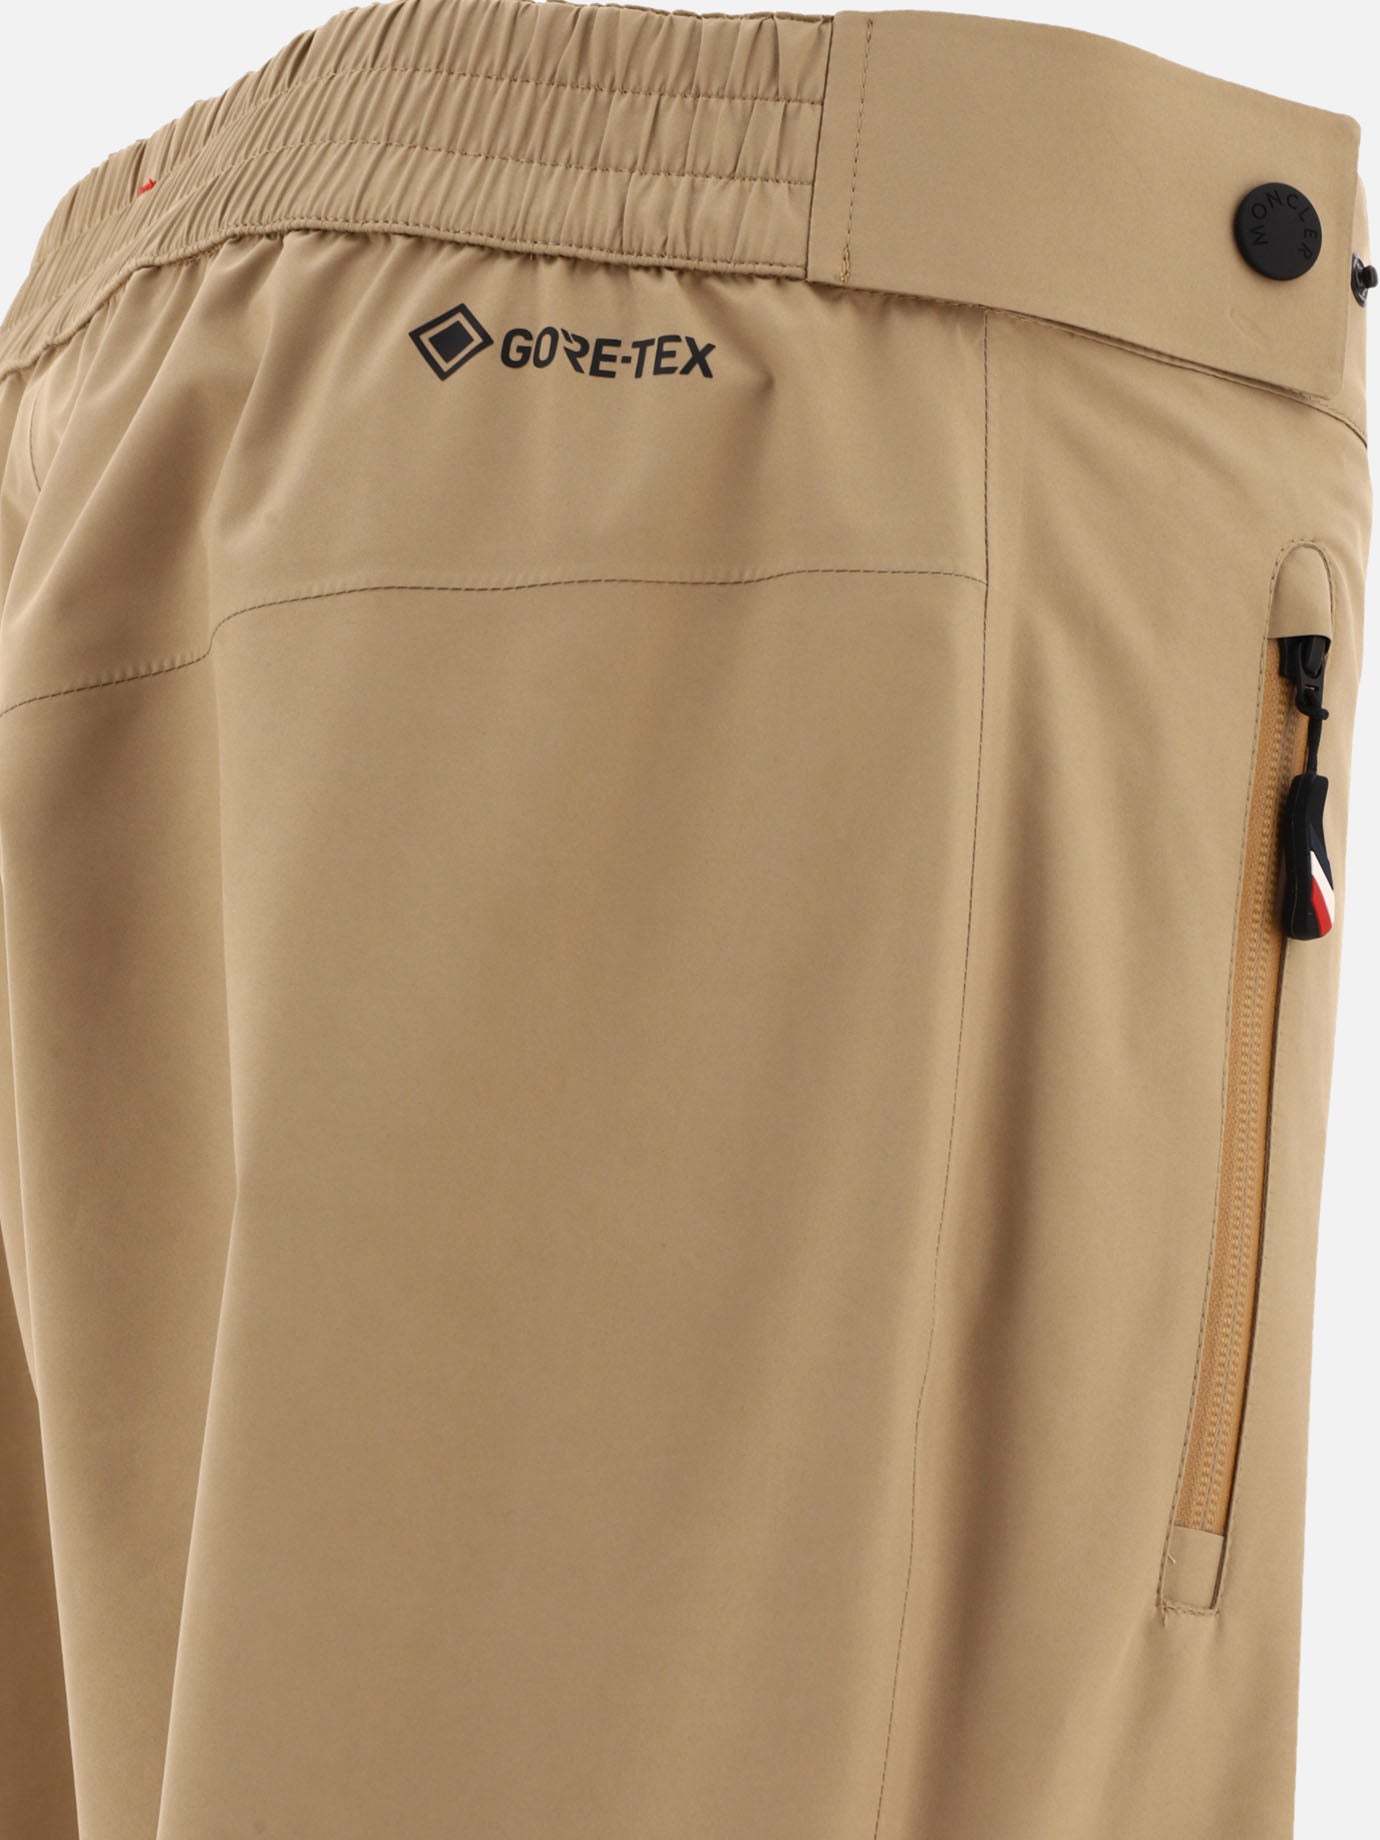 Gore-Tex trousers